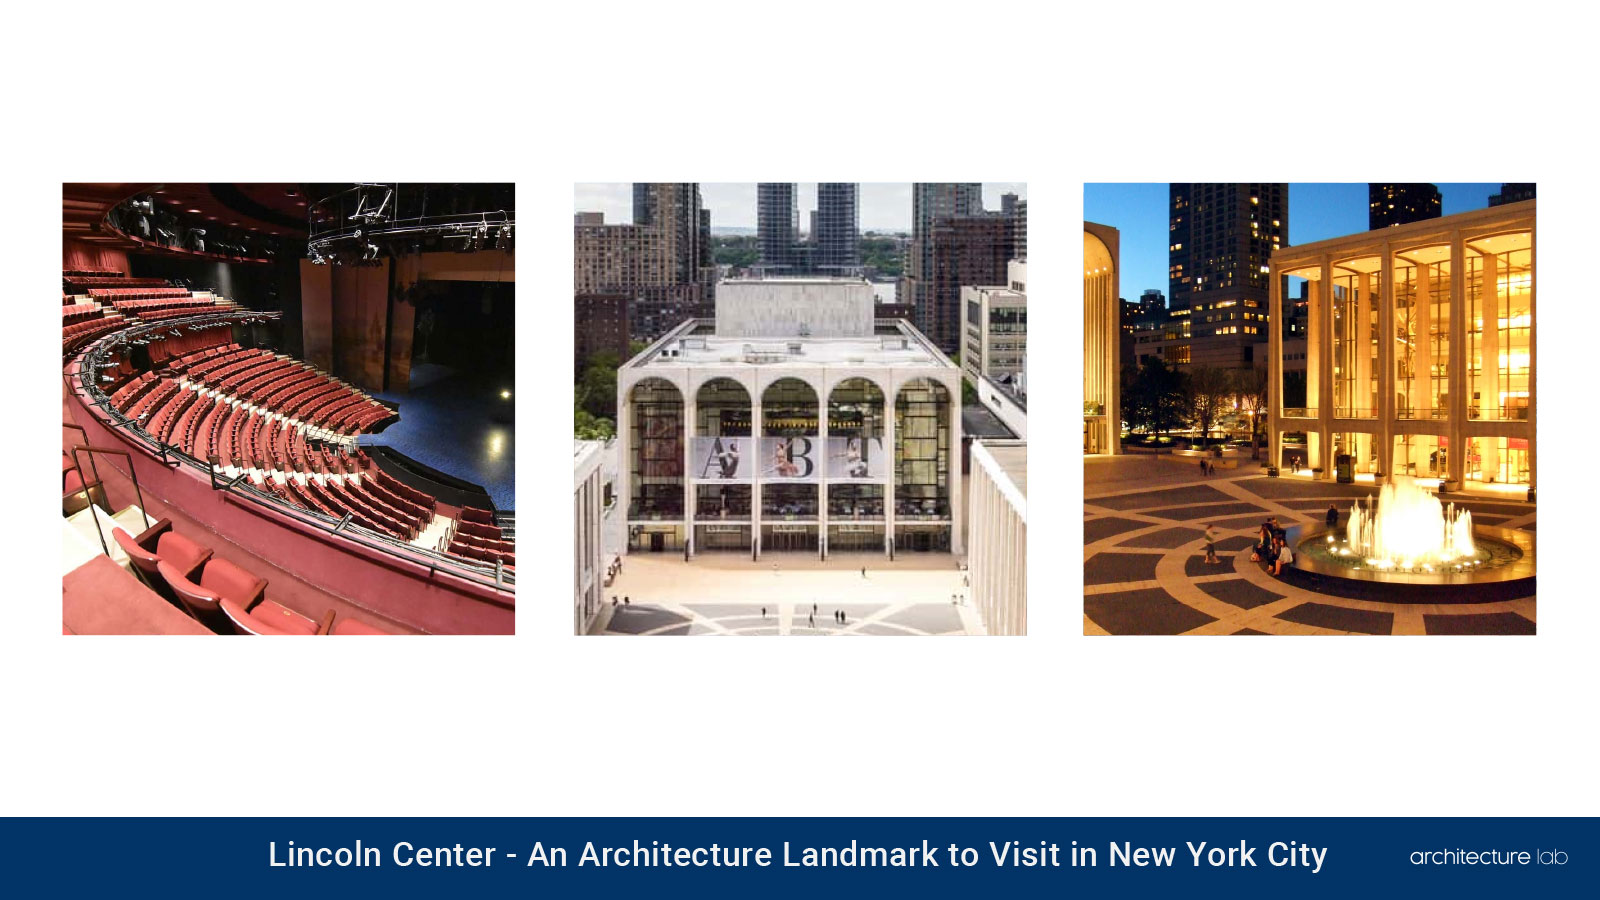 Lincoln center: an architecture landmark to visit in new york city